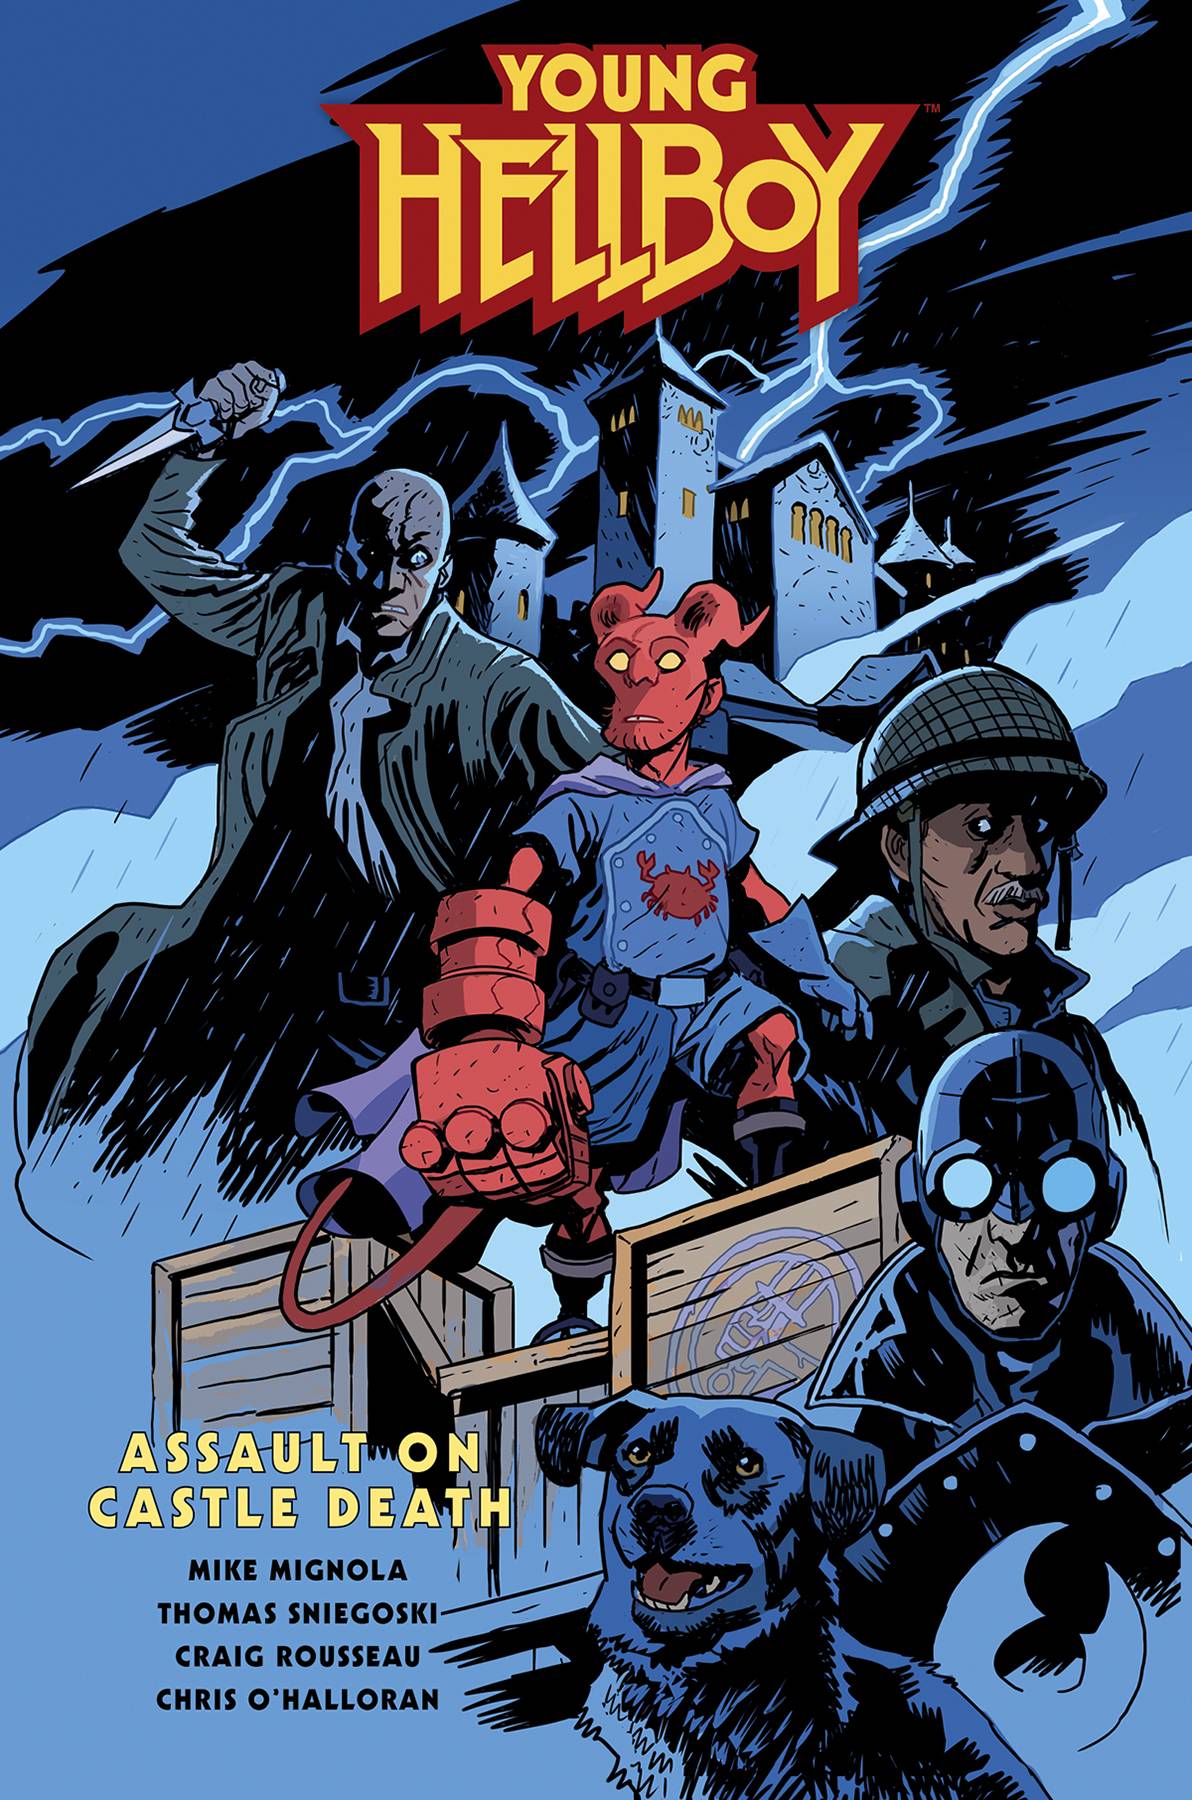 YOUNG HELLBOY ASSAULT ON CASTLE DEATH HC - Third Eye